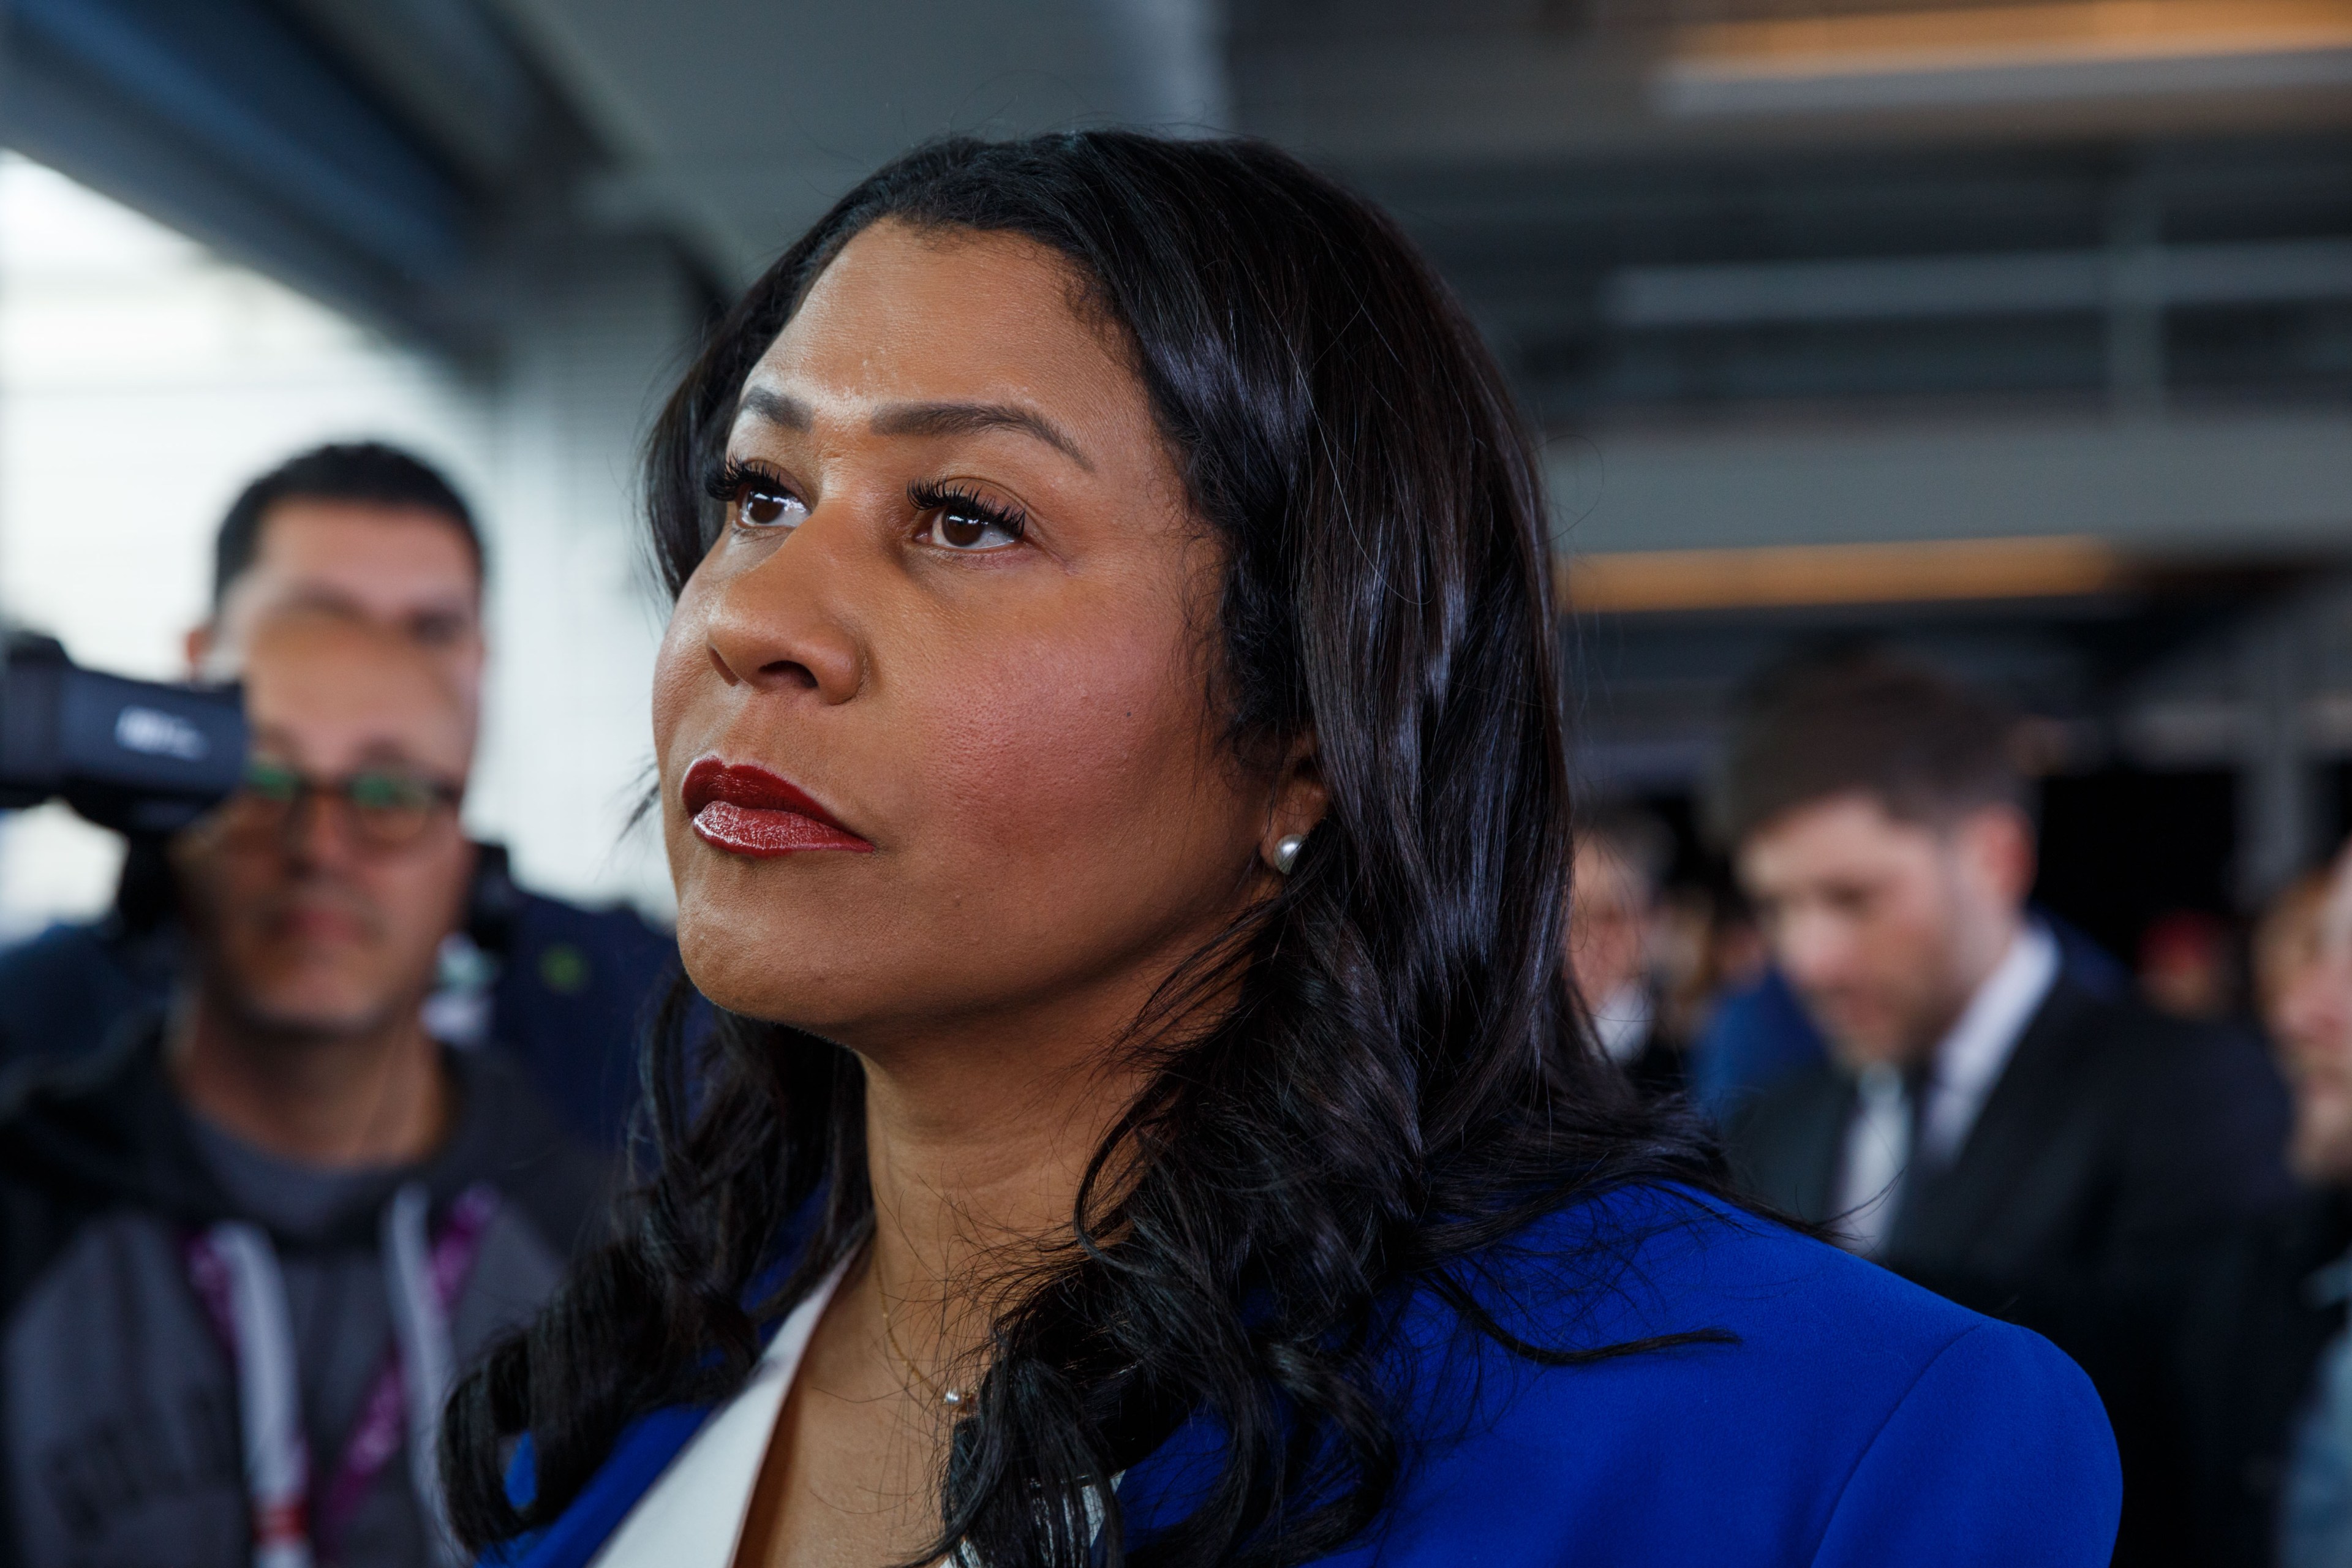 Mayor London Breed in a blue blazer appears focused, with people and a camera in the blurred background.